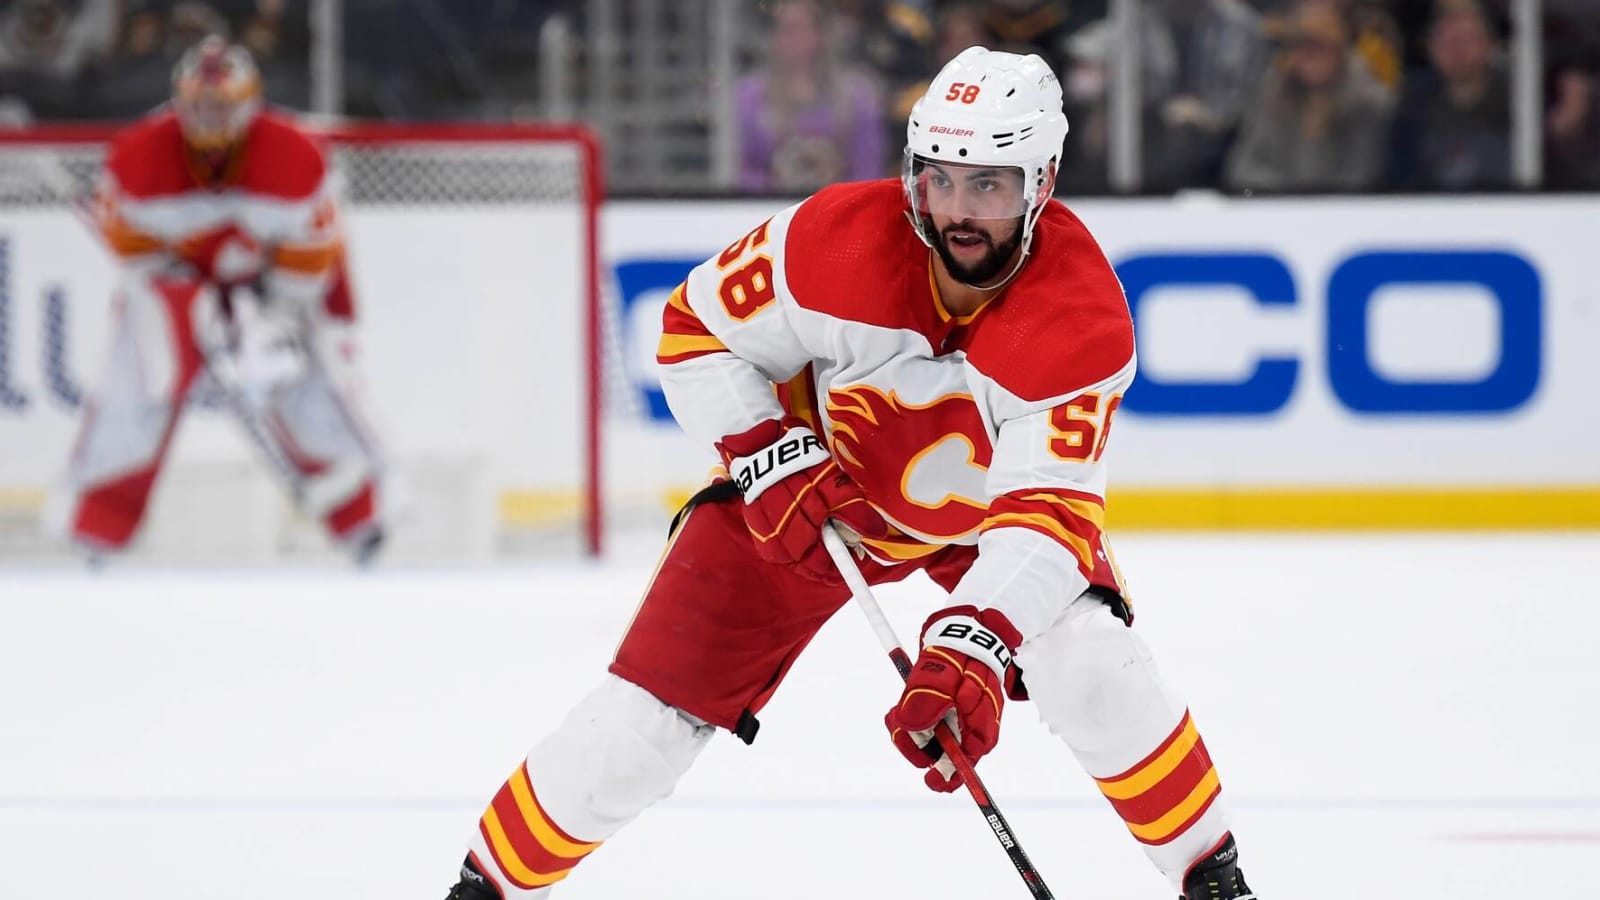 Flames president Don Maloney: Oliver Kylington is ‘excited about coming back next season’